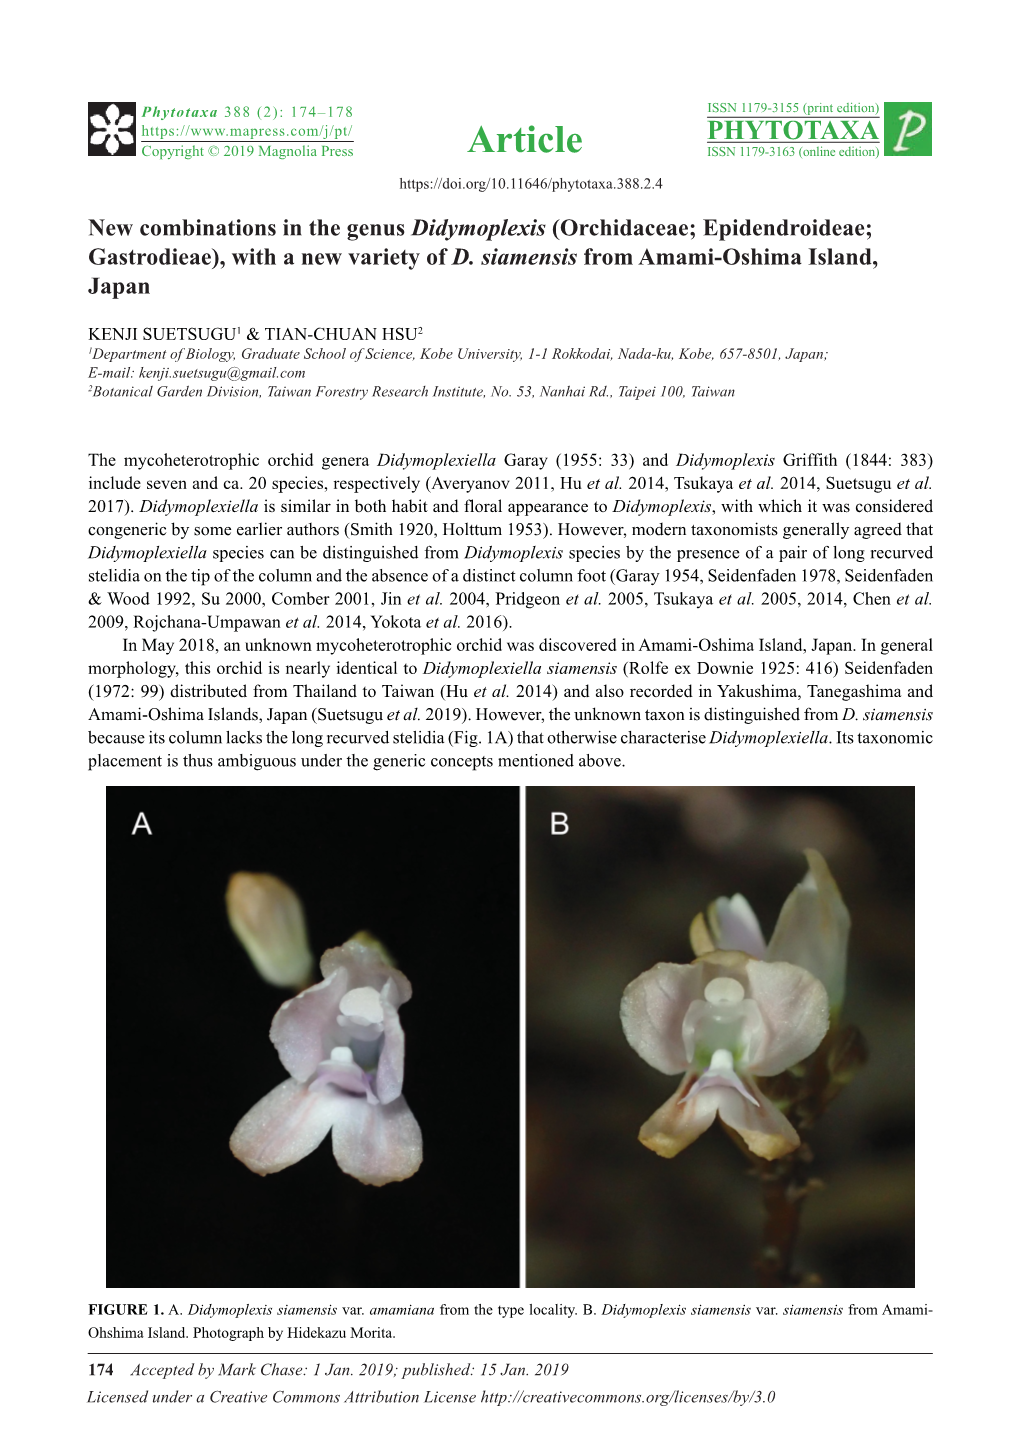 New Combinations in the Genus Didymoplexis (Orchidaceae; Epidendroideae; Gastrodieae), with a New Variety of D